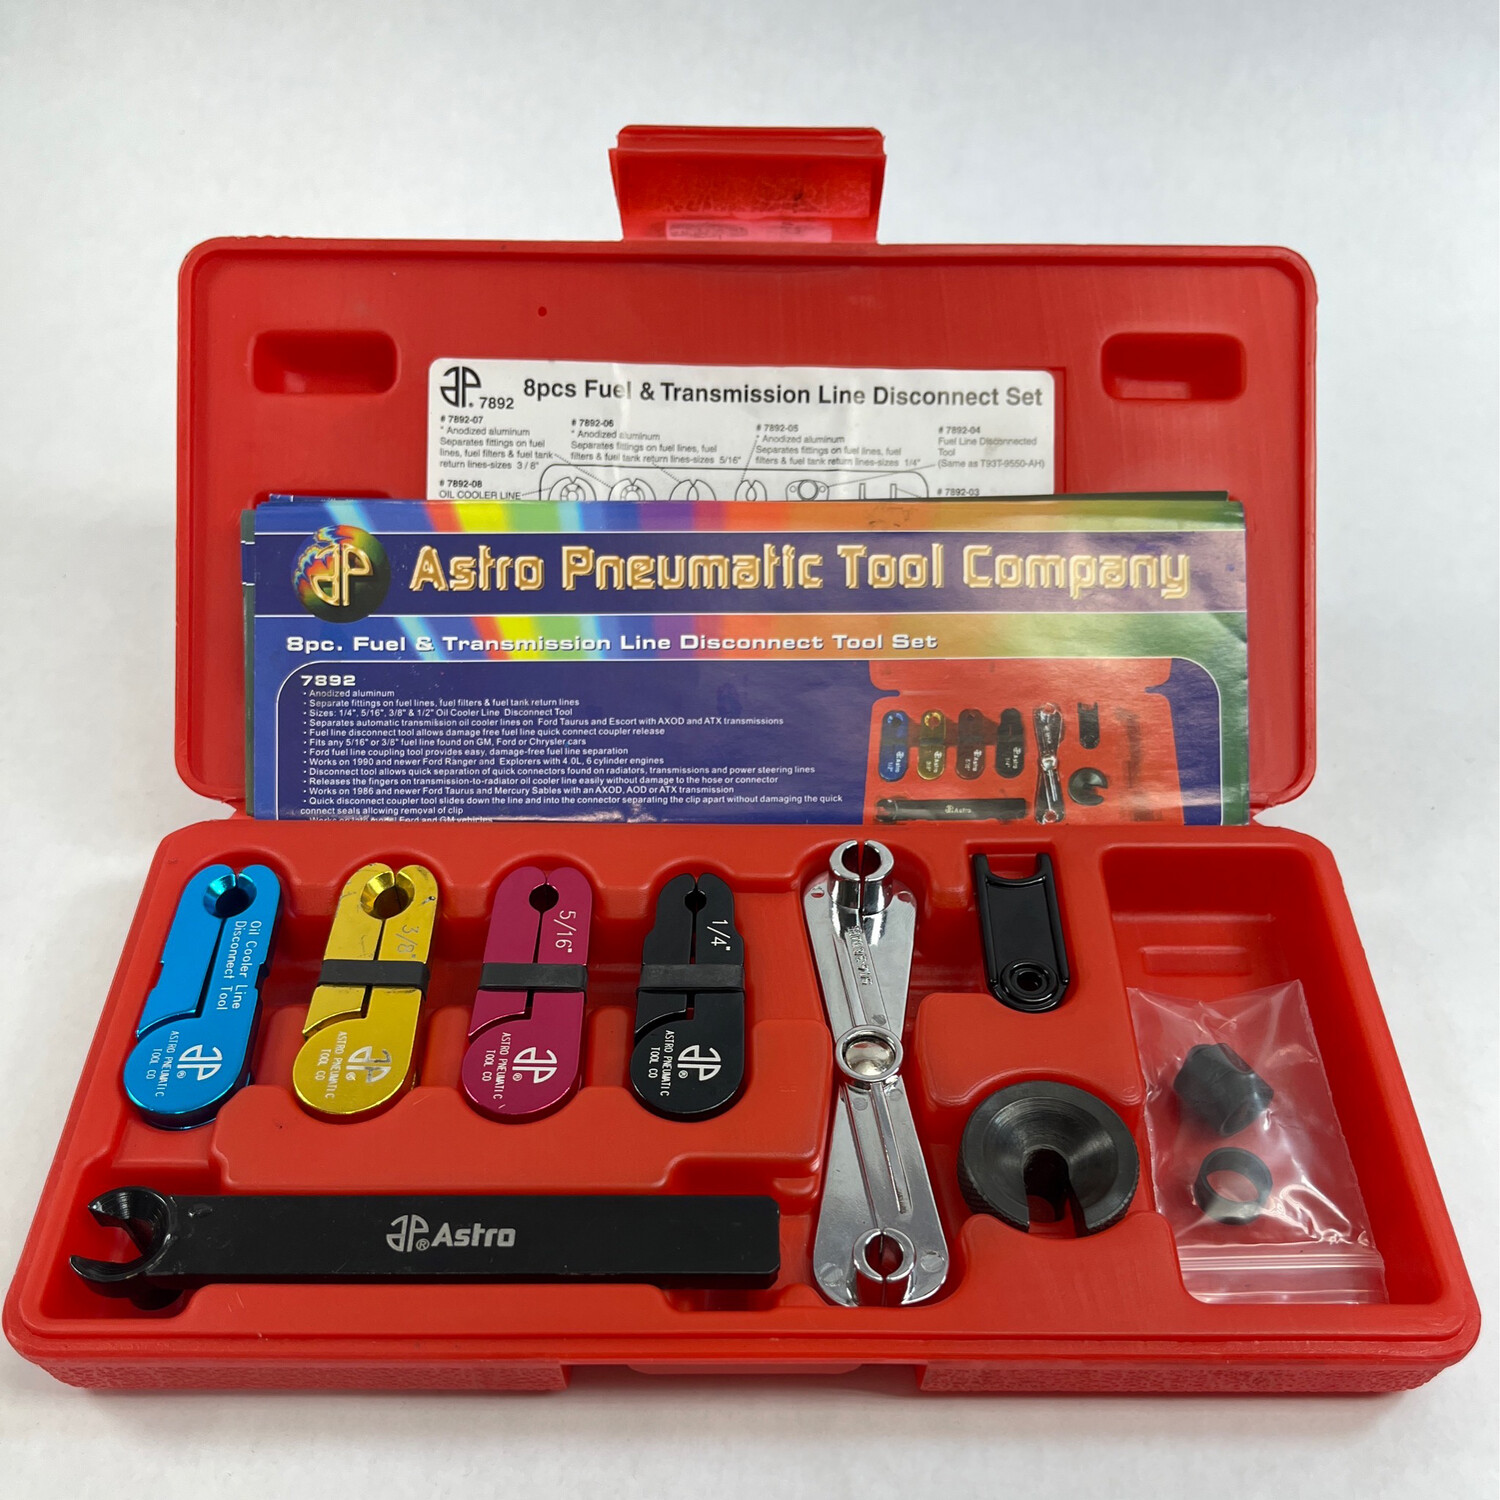 Astro Pneumatic 8 Pc. Fuel & Transmission Line Disconnect Tool Set, 7892